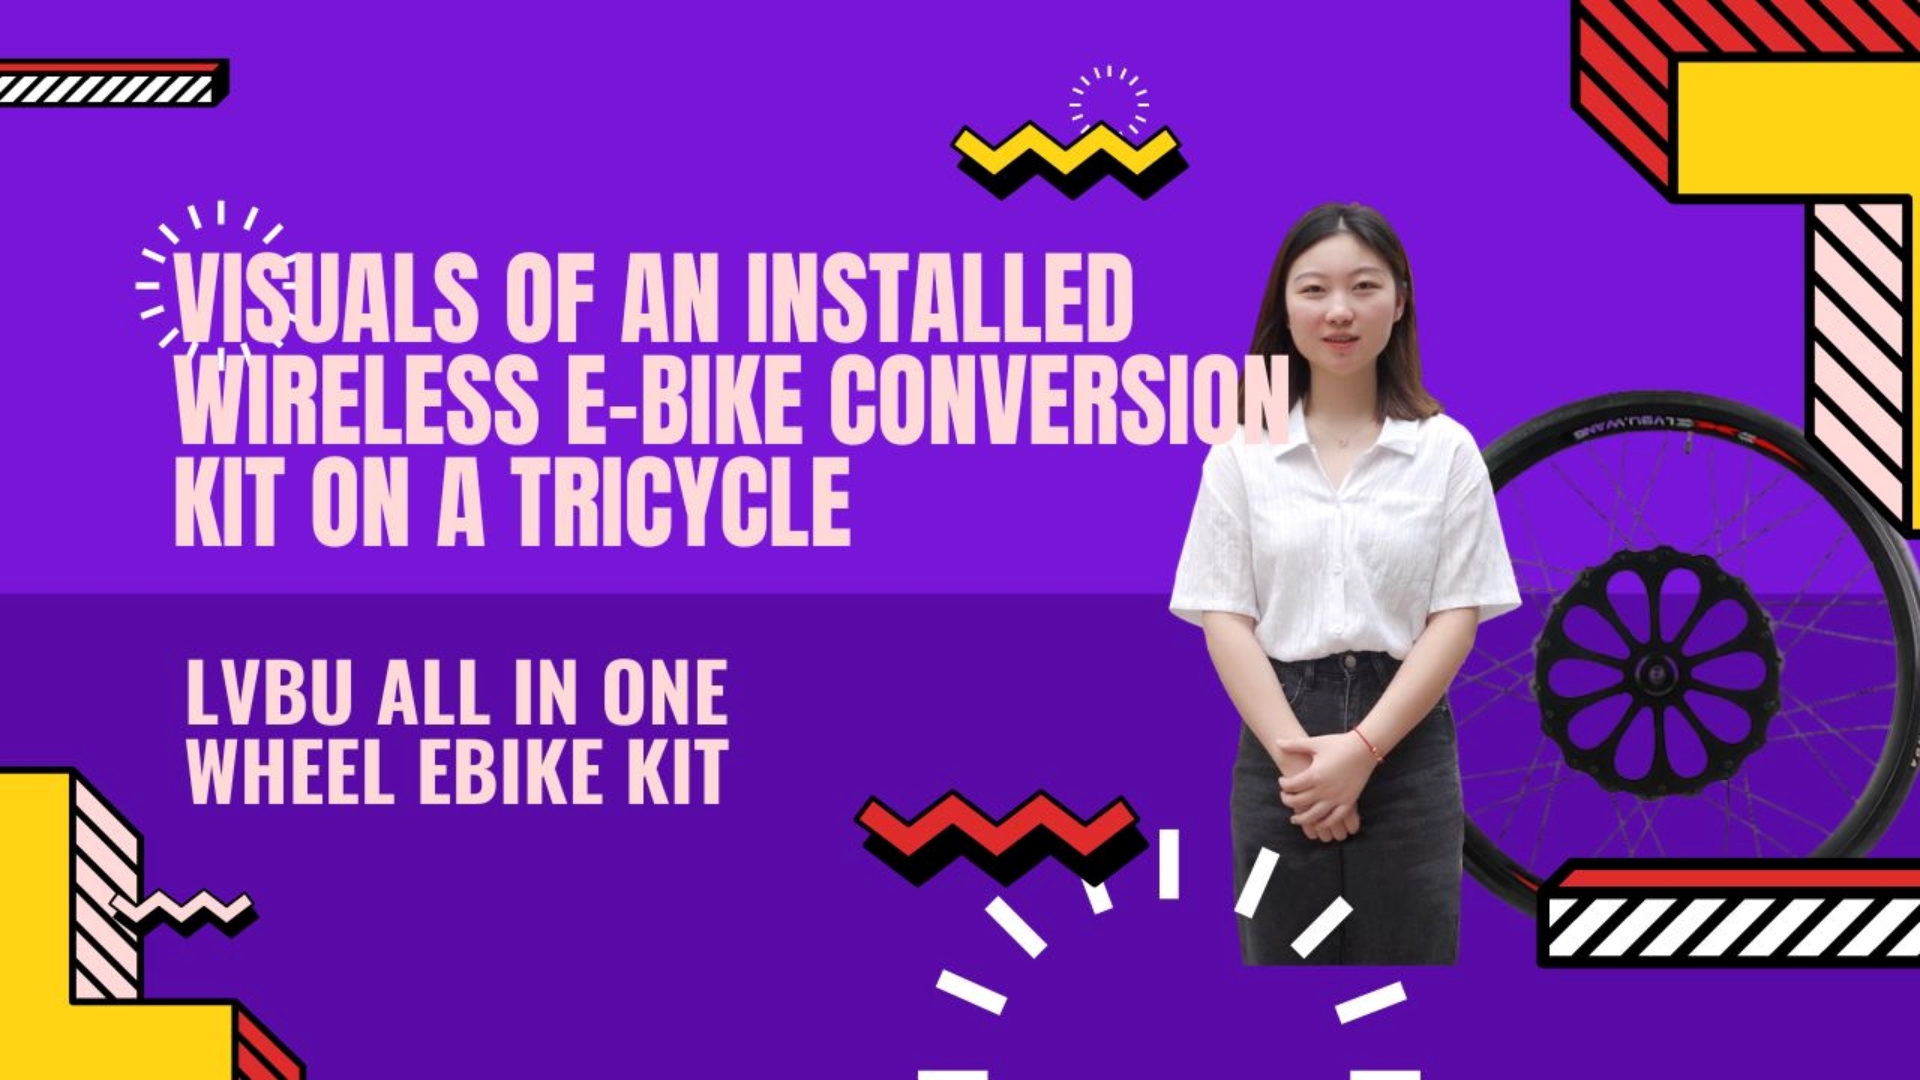 ALL-IN-ONE Ebike kit ‖ What does the Wireless E-bike Conversion Kit Look Like When Installed on a T